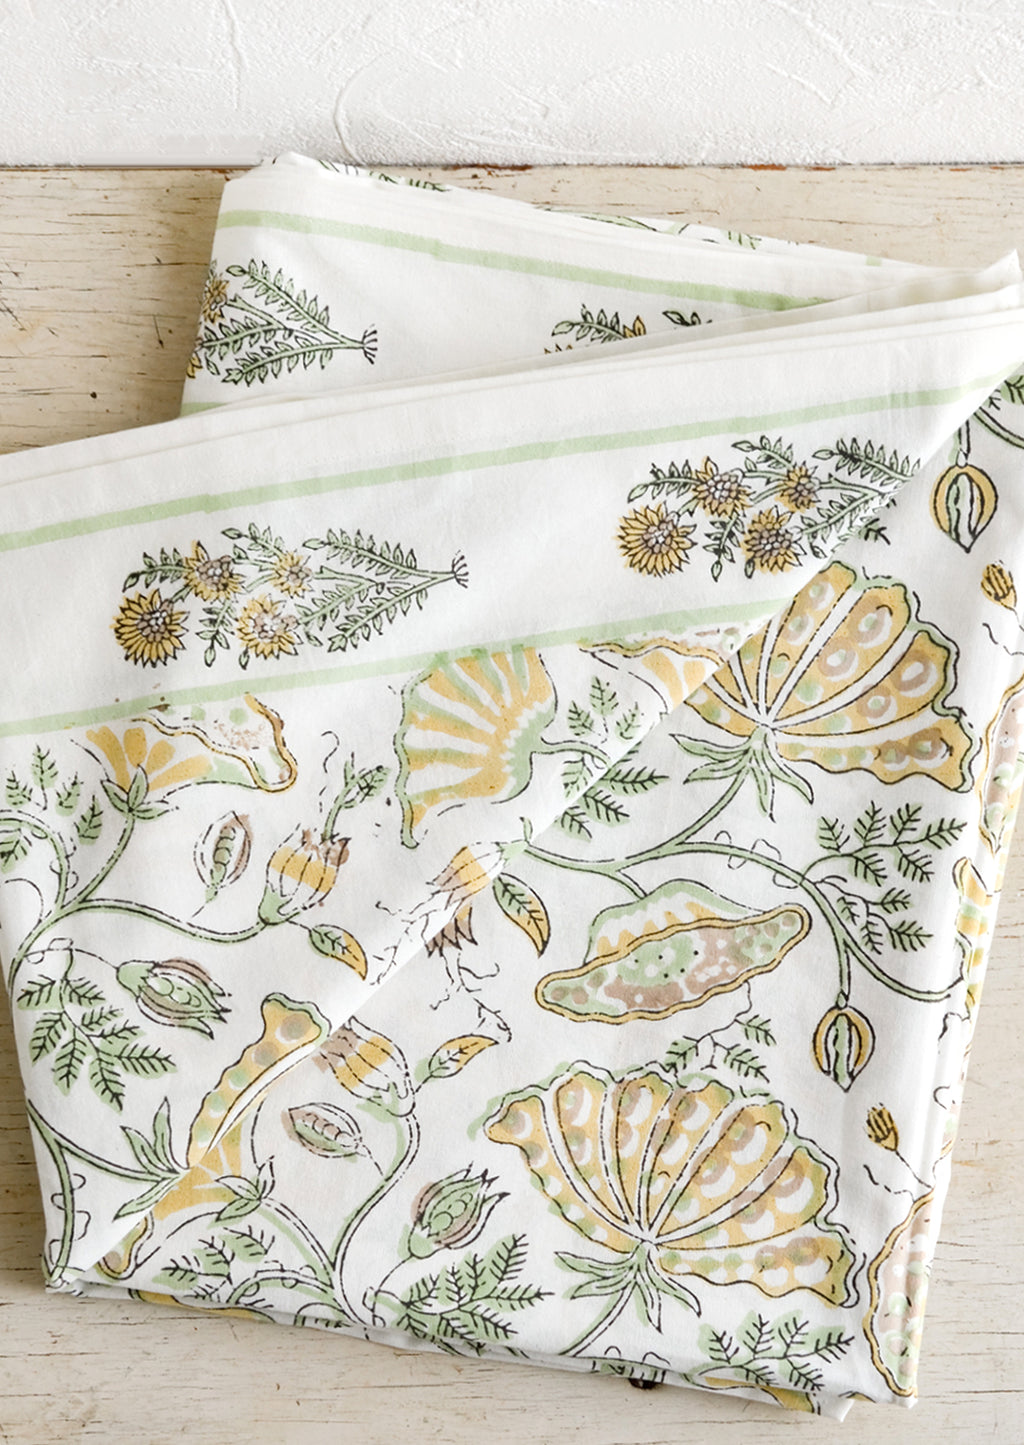 Mint Multi: A botanical block printed tablecloth in mint and yellow.